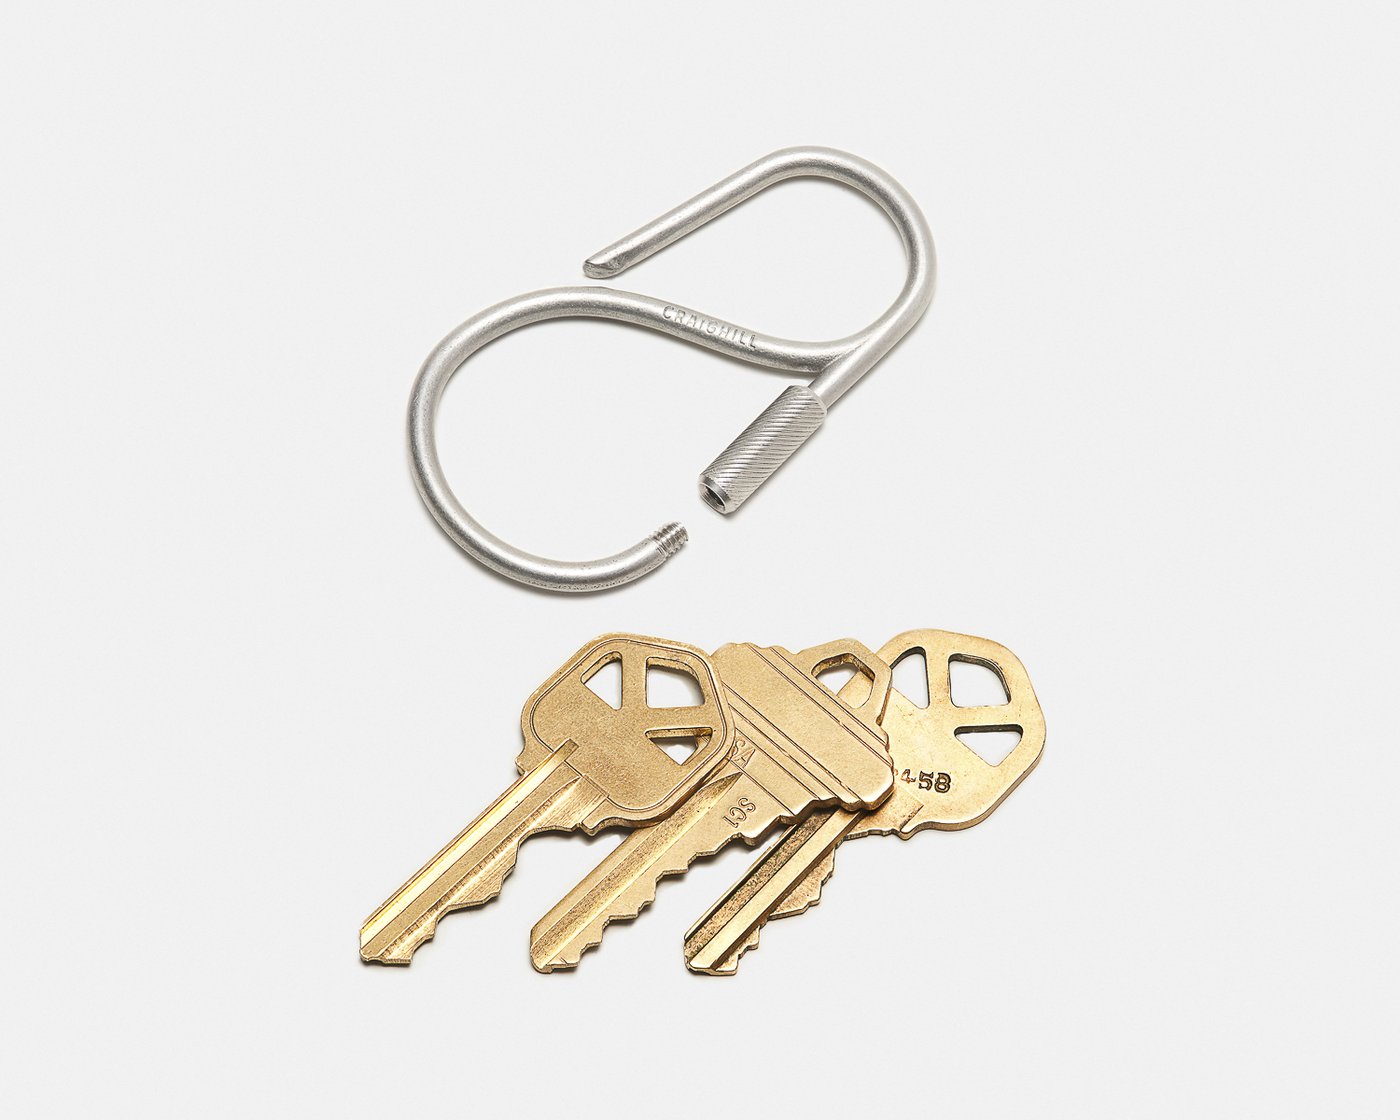 Craighill - Offset Keyring - Stainless Steel